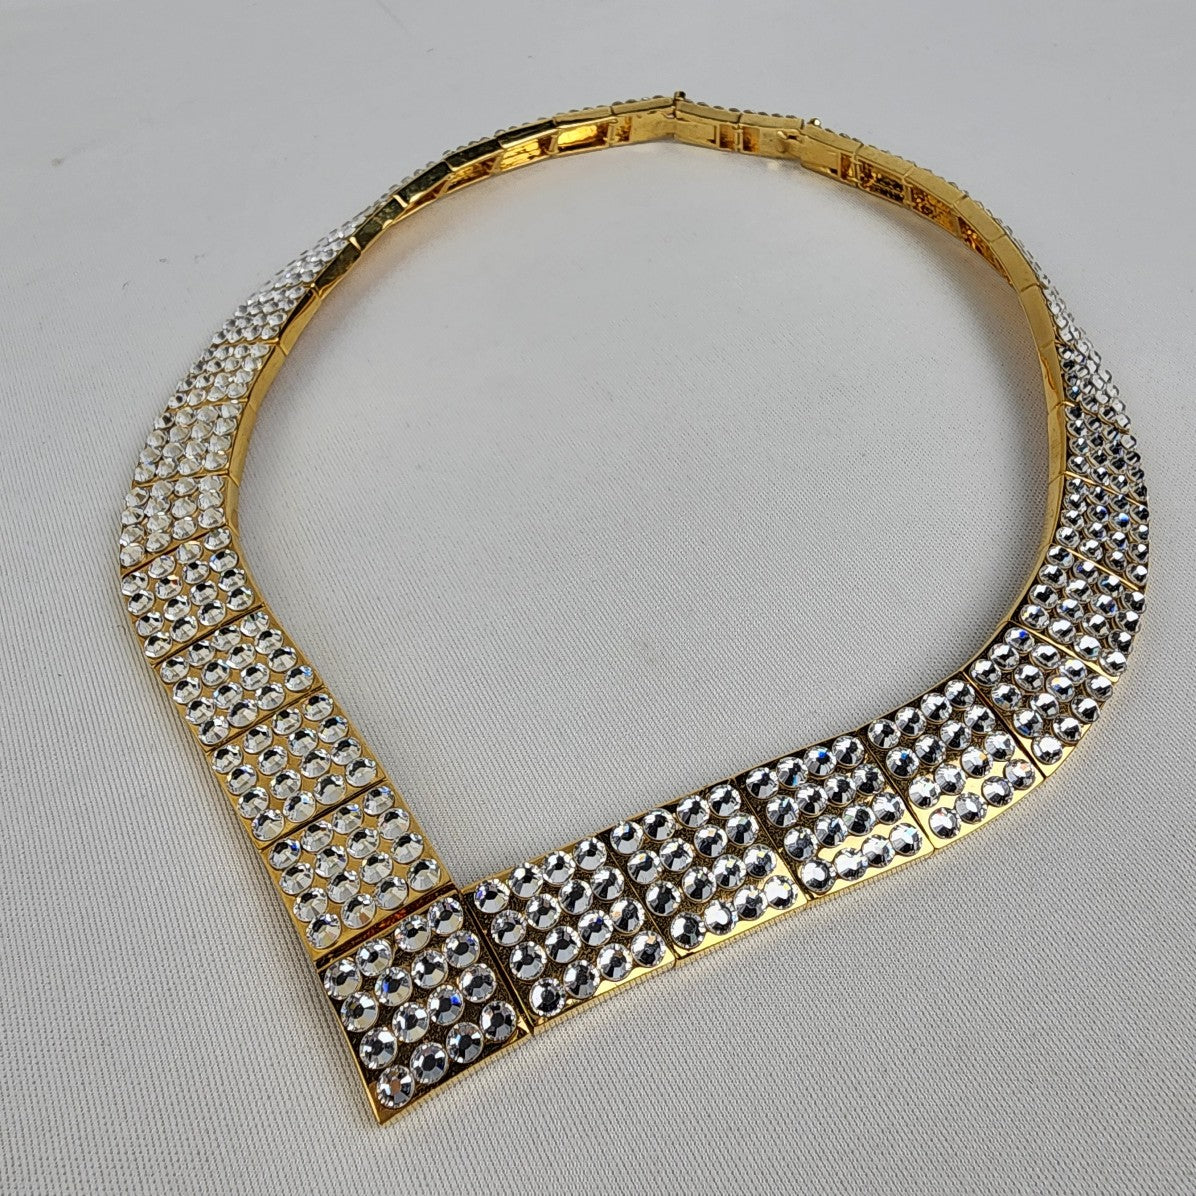 Fifth Avenue Collection Gold Tone Clear Rhinestones Choker Necklace